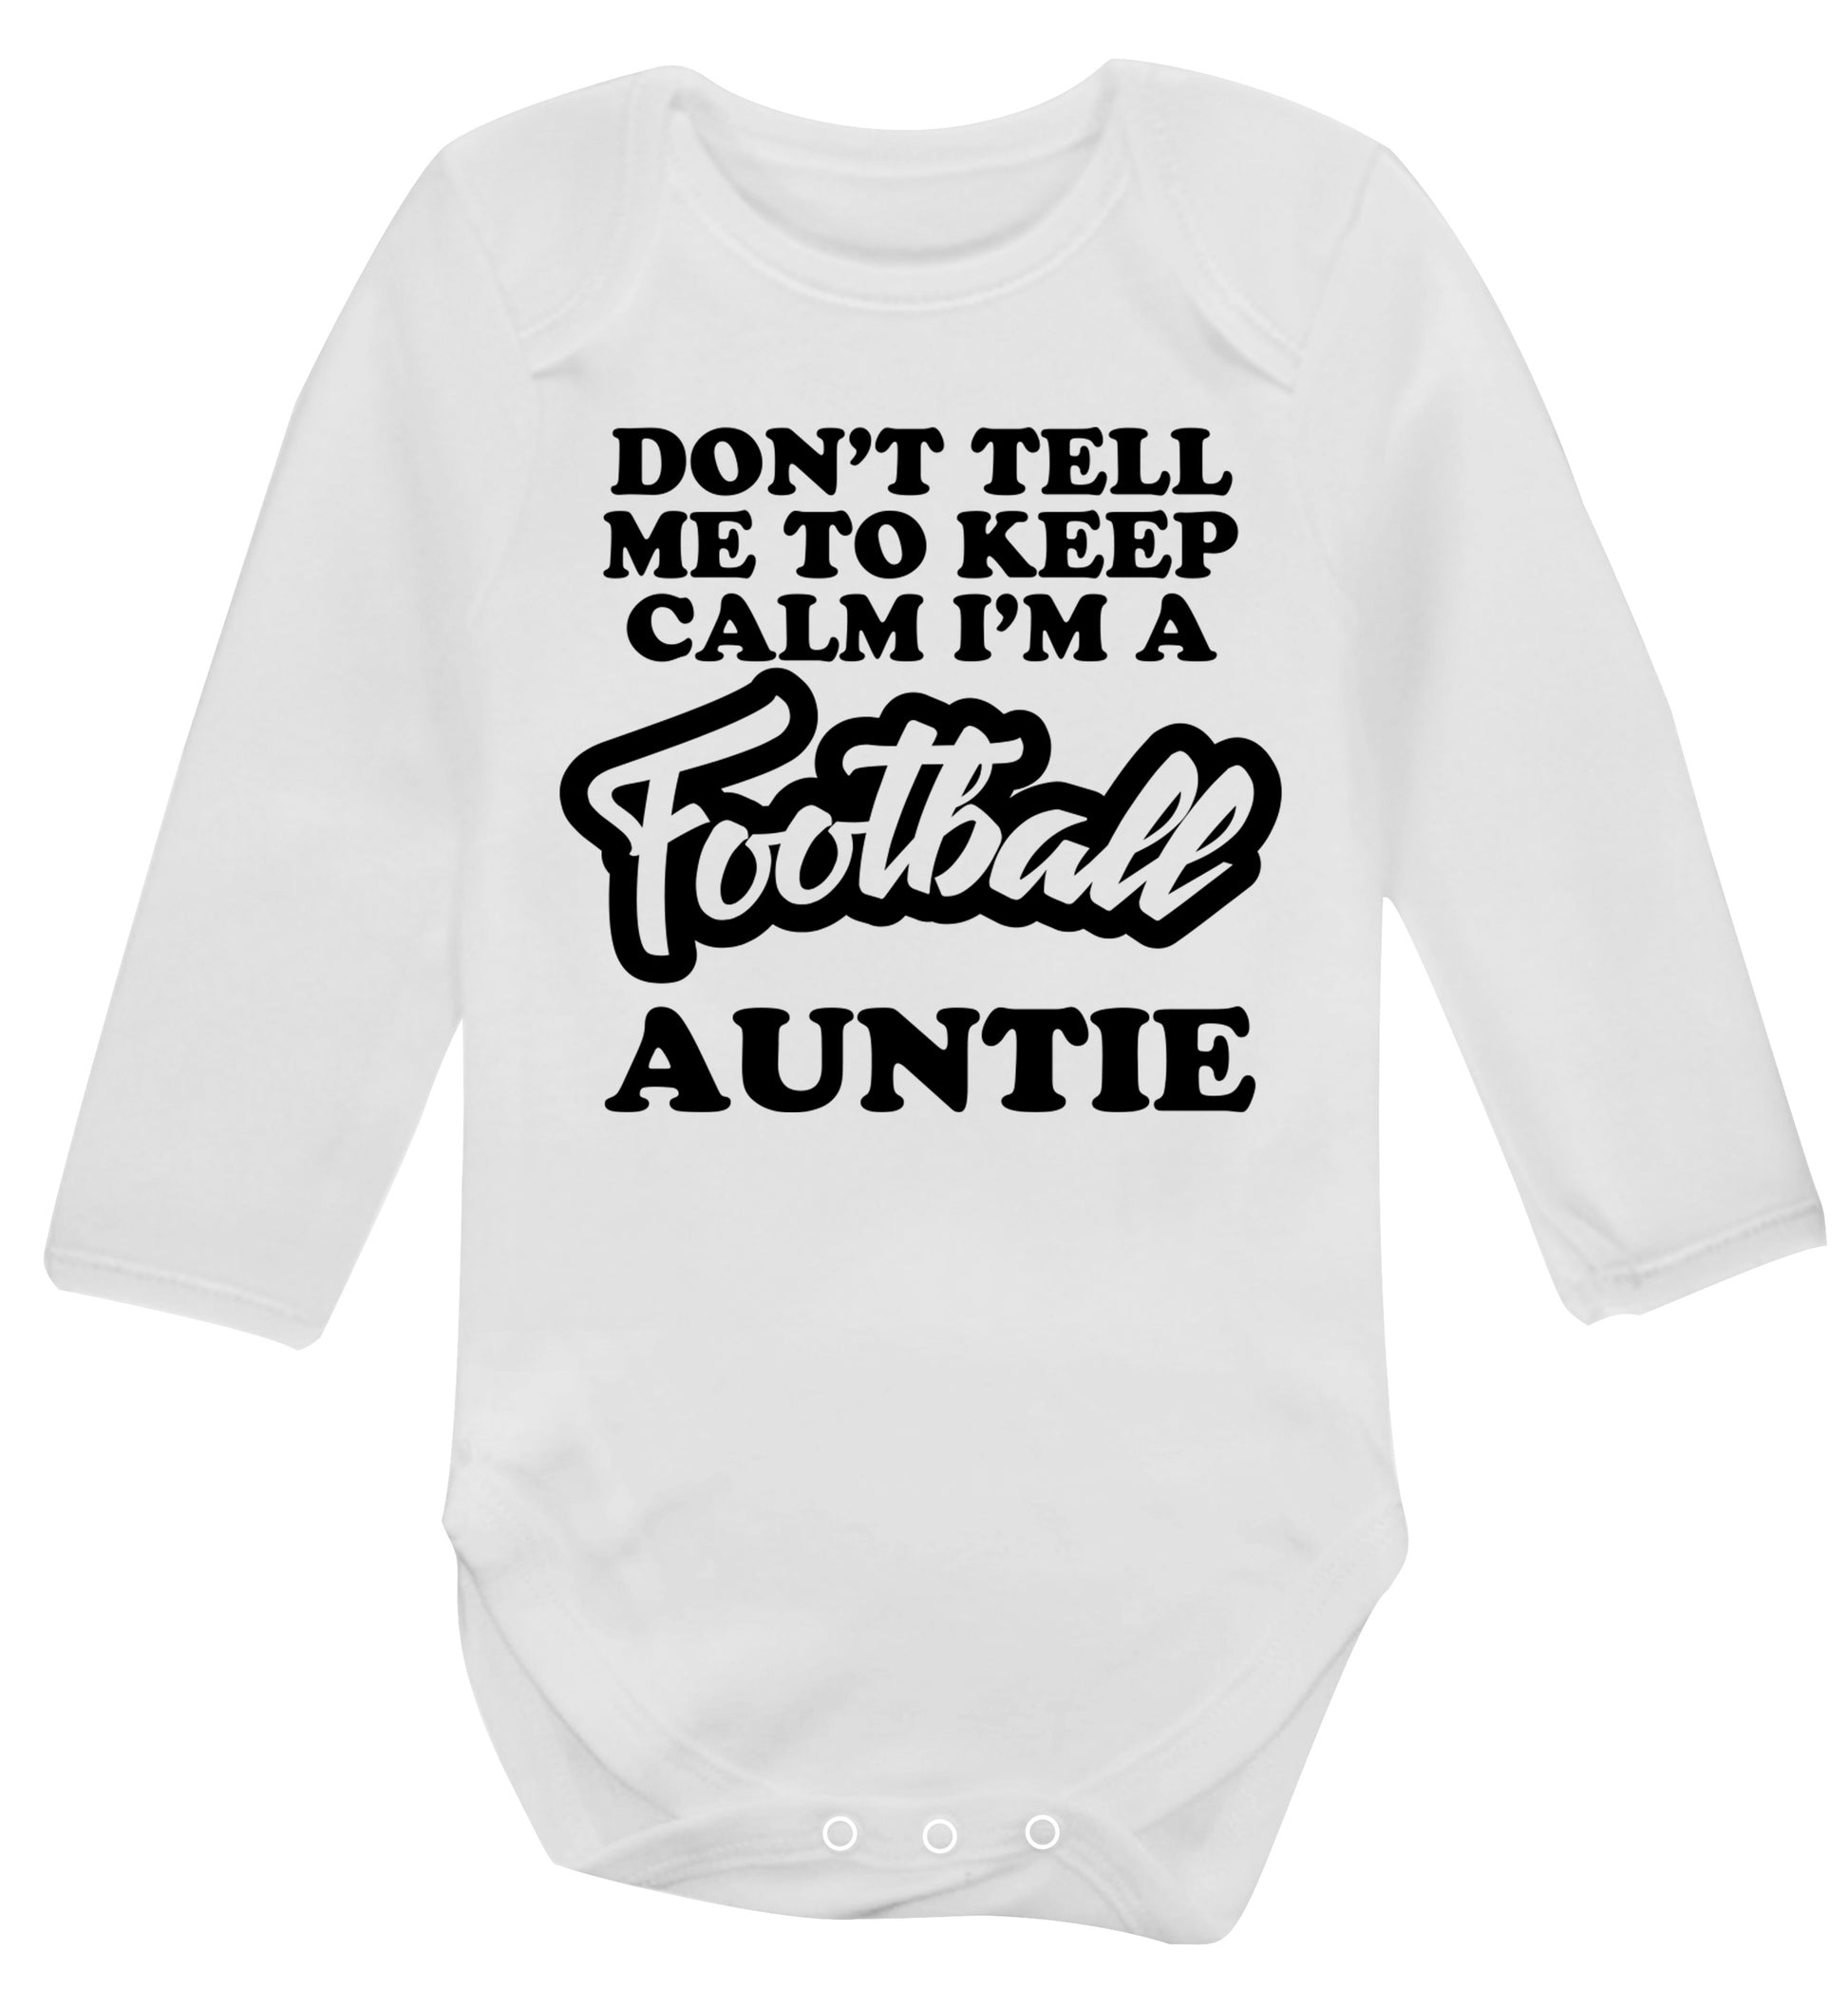 Don't tell me to keep calm I'm a football auntie Baby Vest long sleeved white 6-12 months